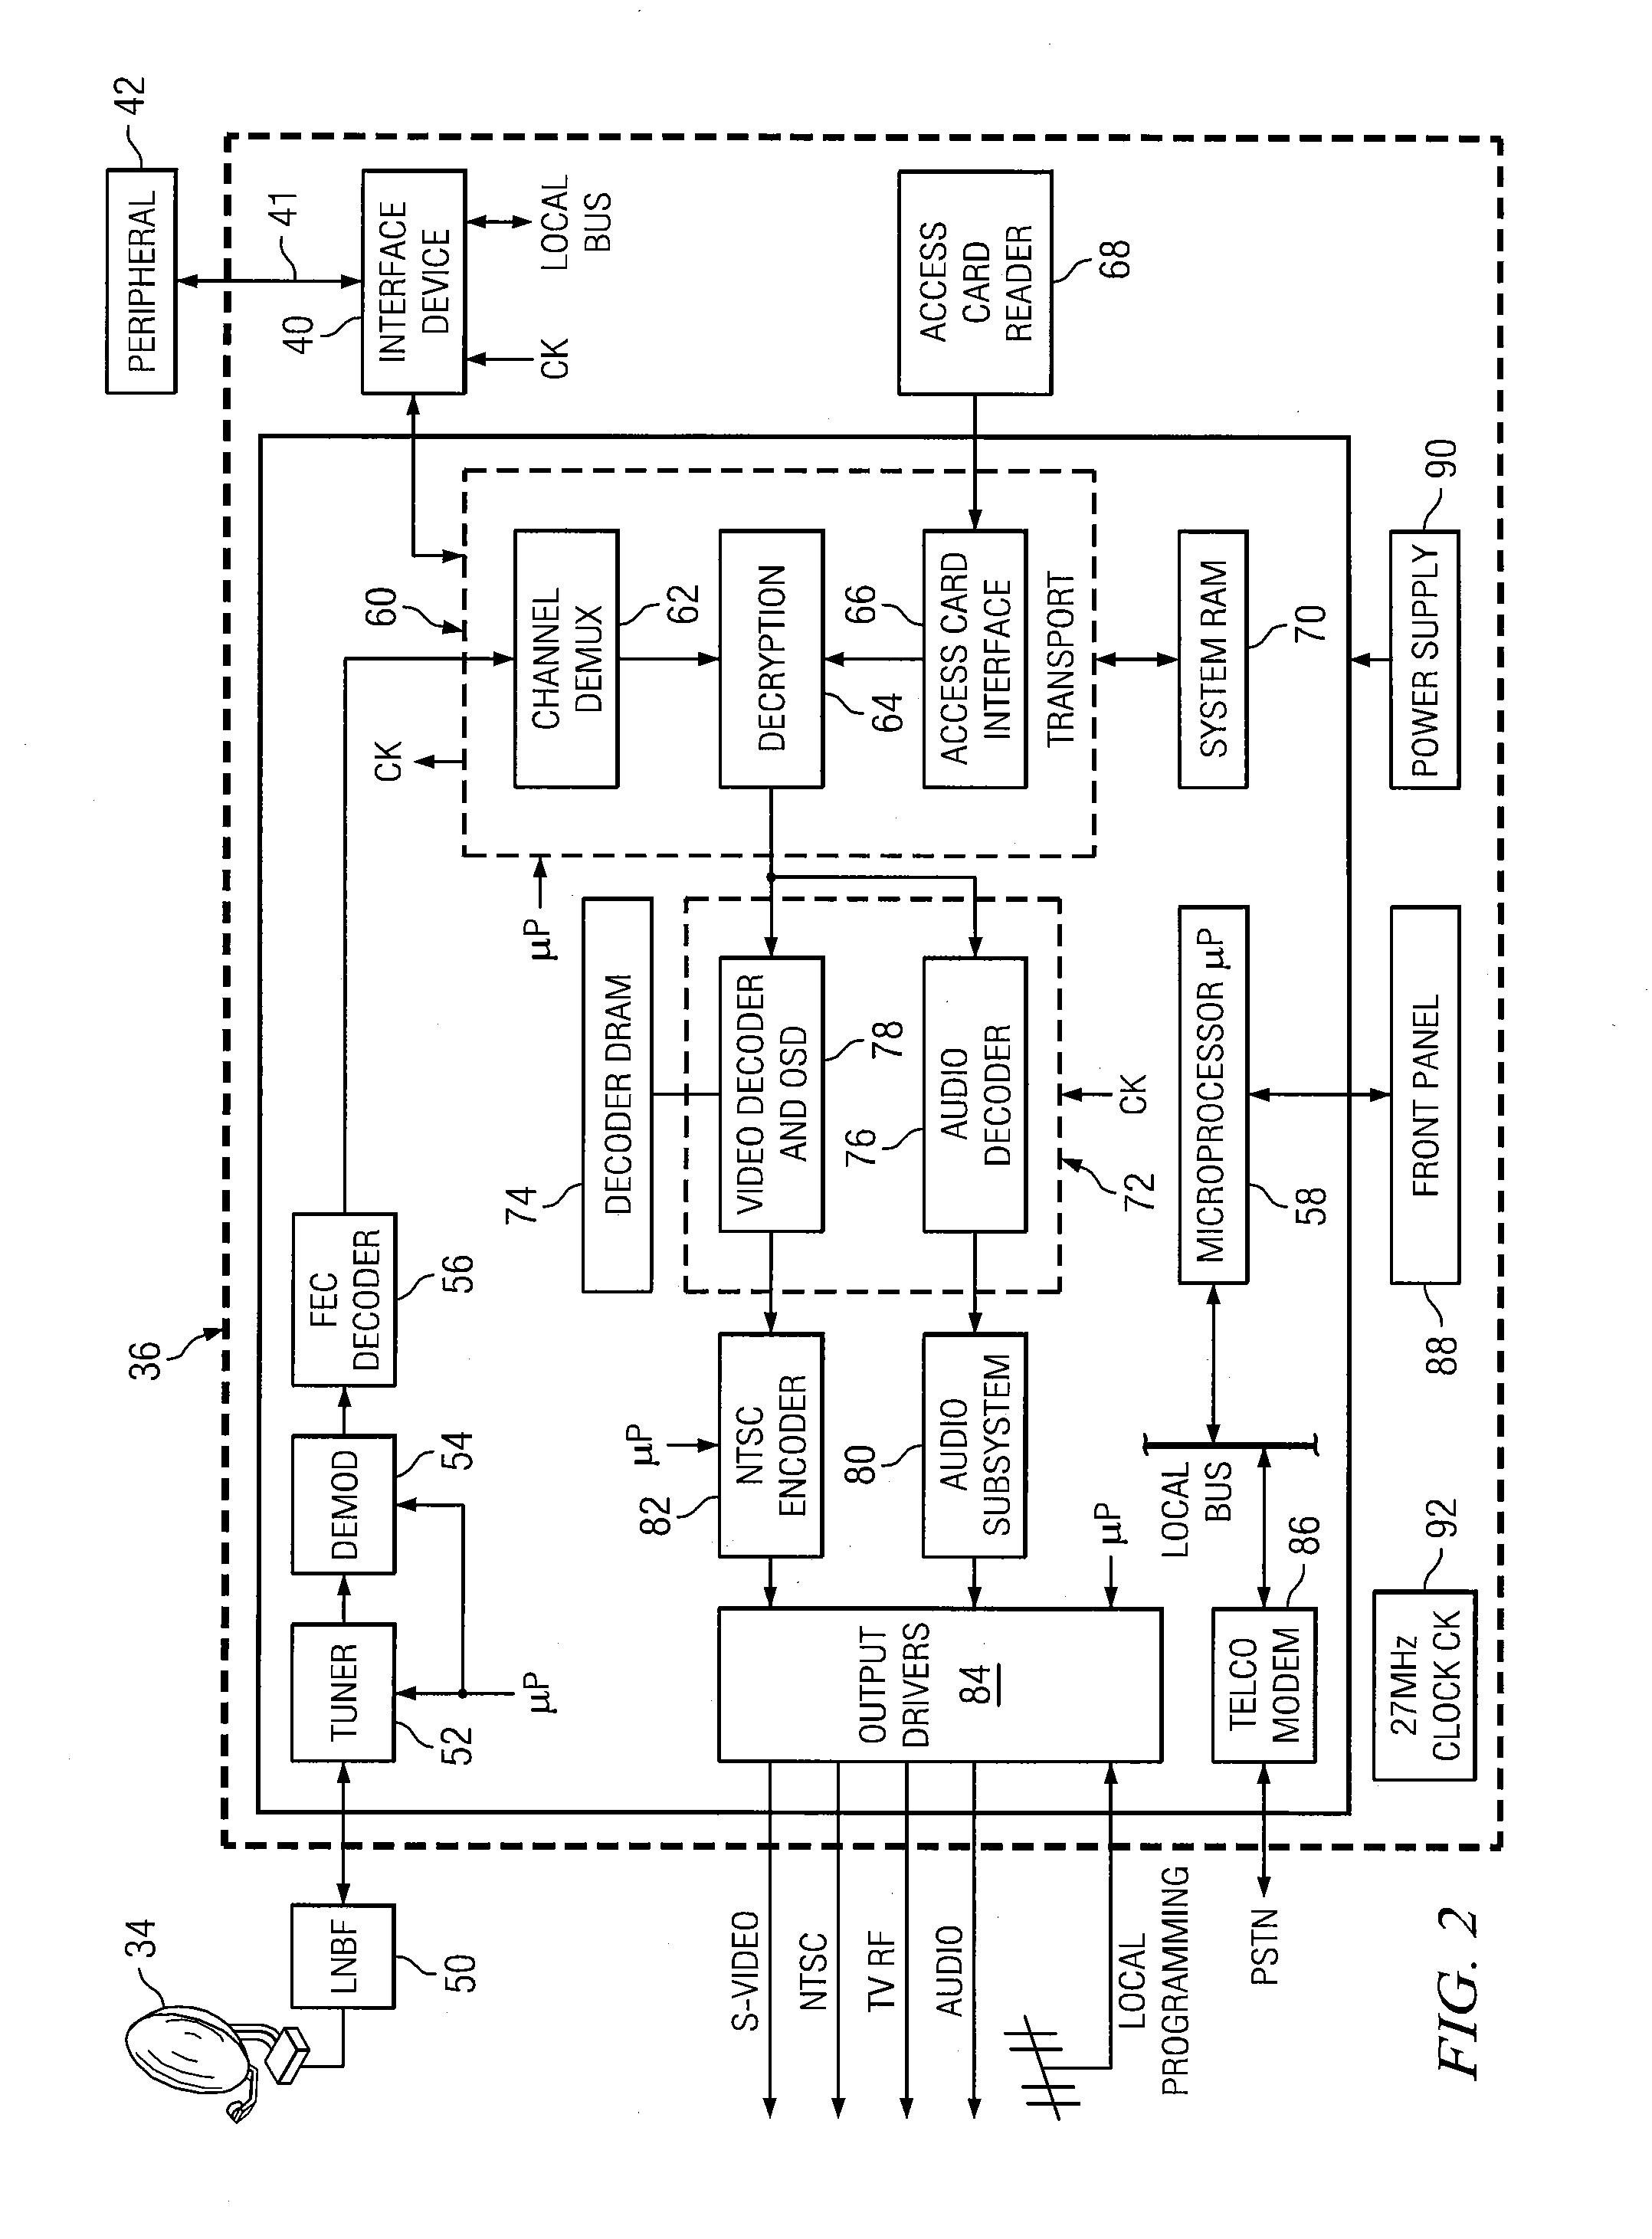 Method and apparatus for conditionally processing, storing, and displaying digital channel content in a television reception system